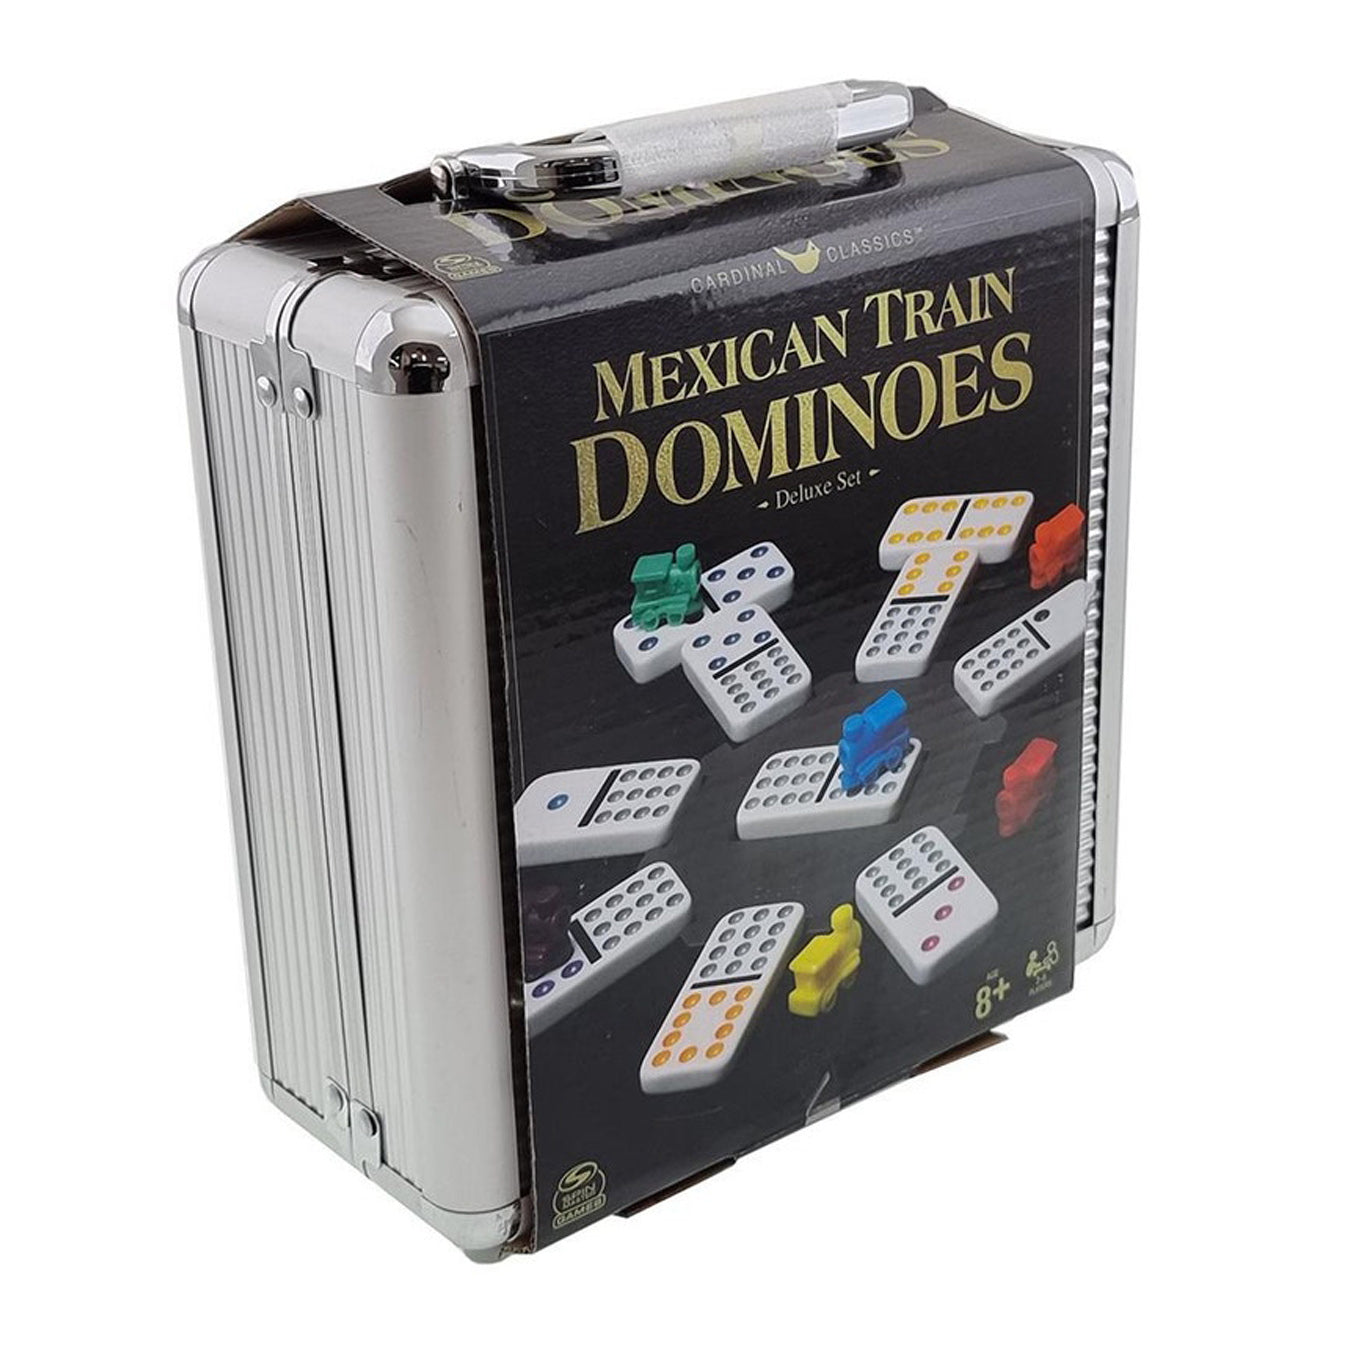 Mexican Train Dominoes dot12 Deluxe Set